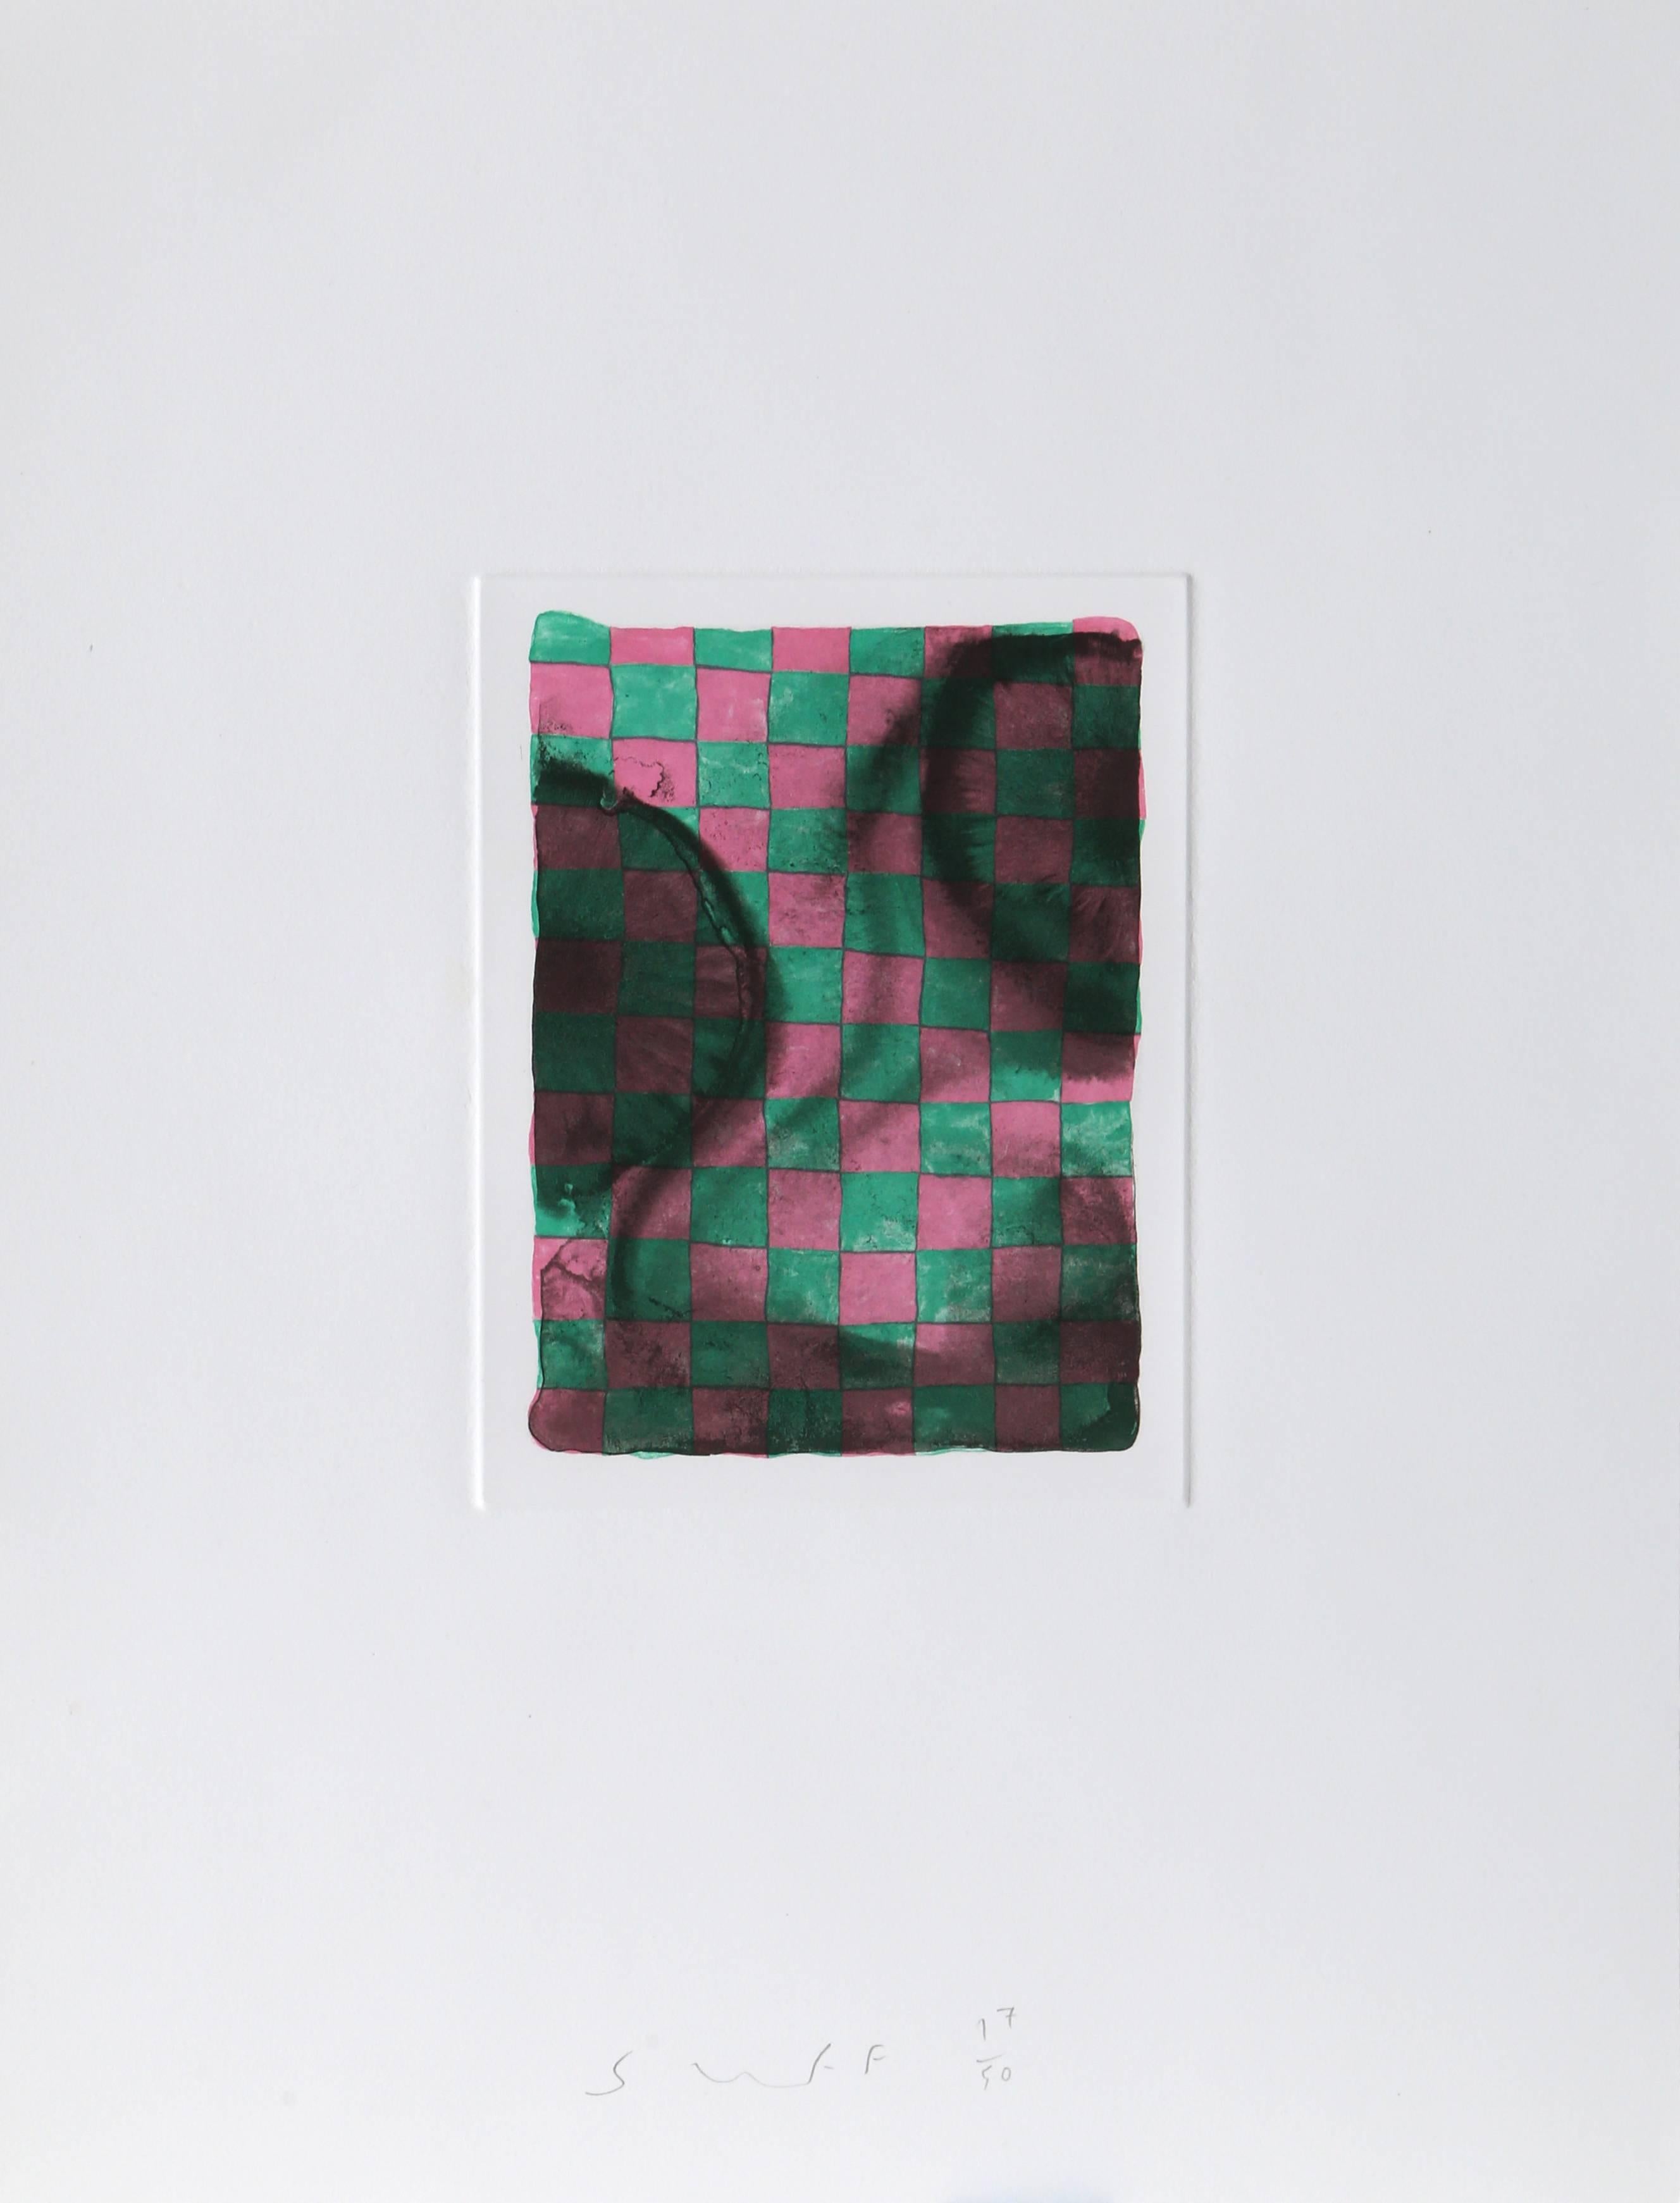 Peter Schuyff Abstract Print - "Green and Pink Checkerboard, " Etching with Aquatint, 1990